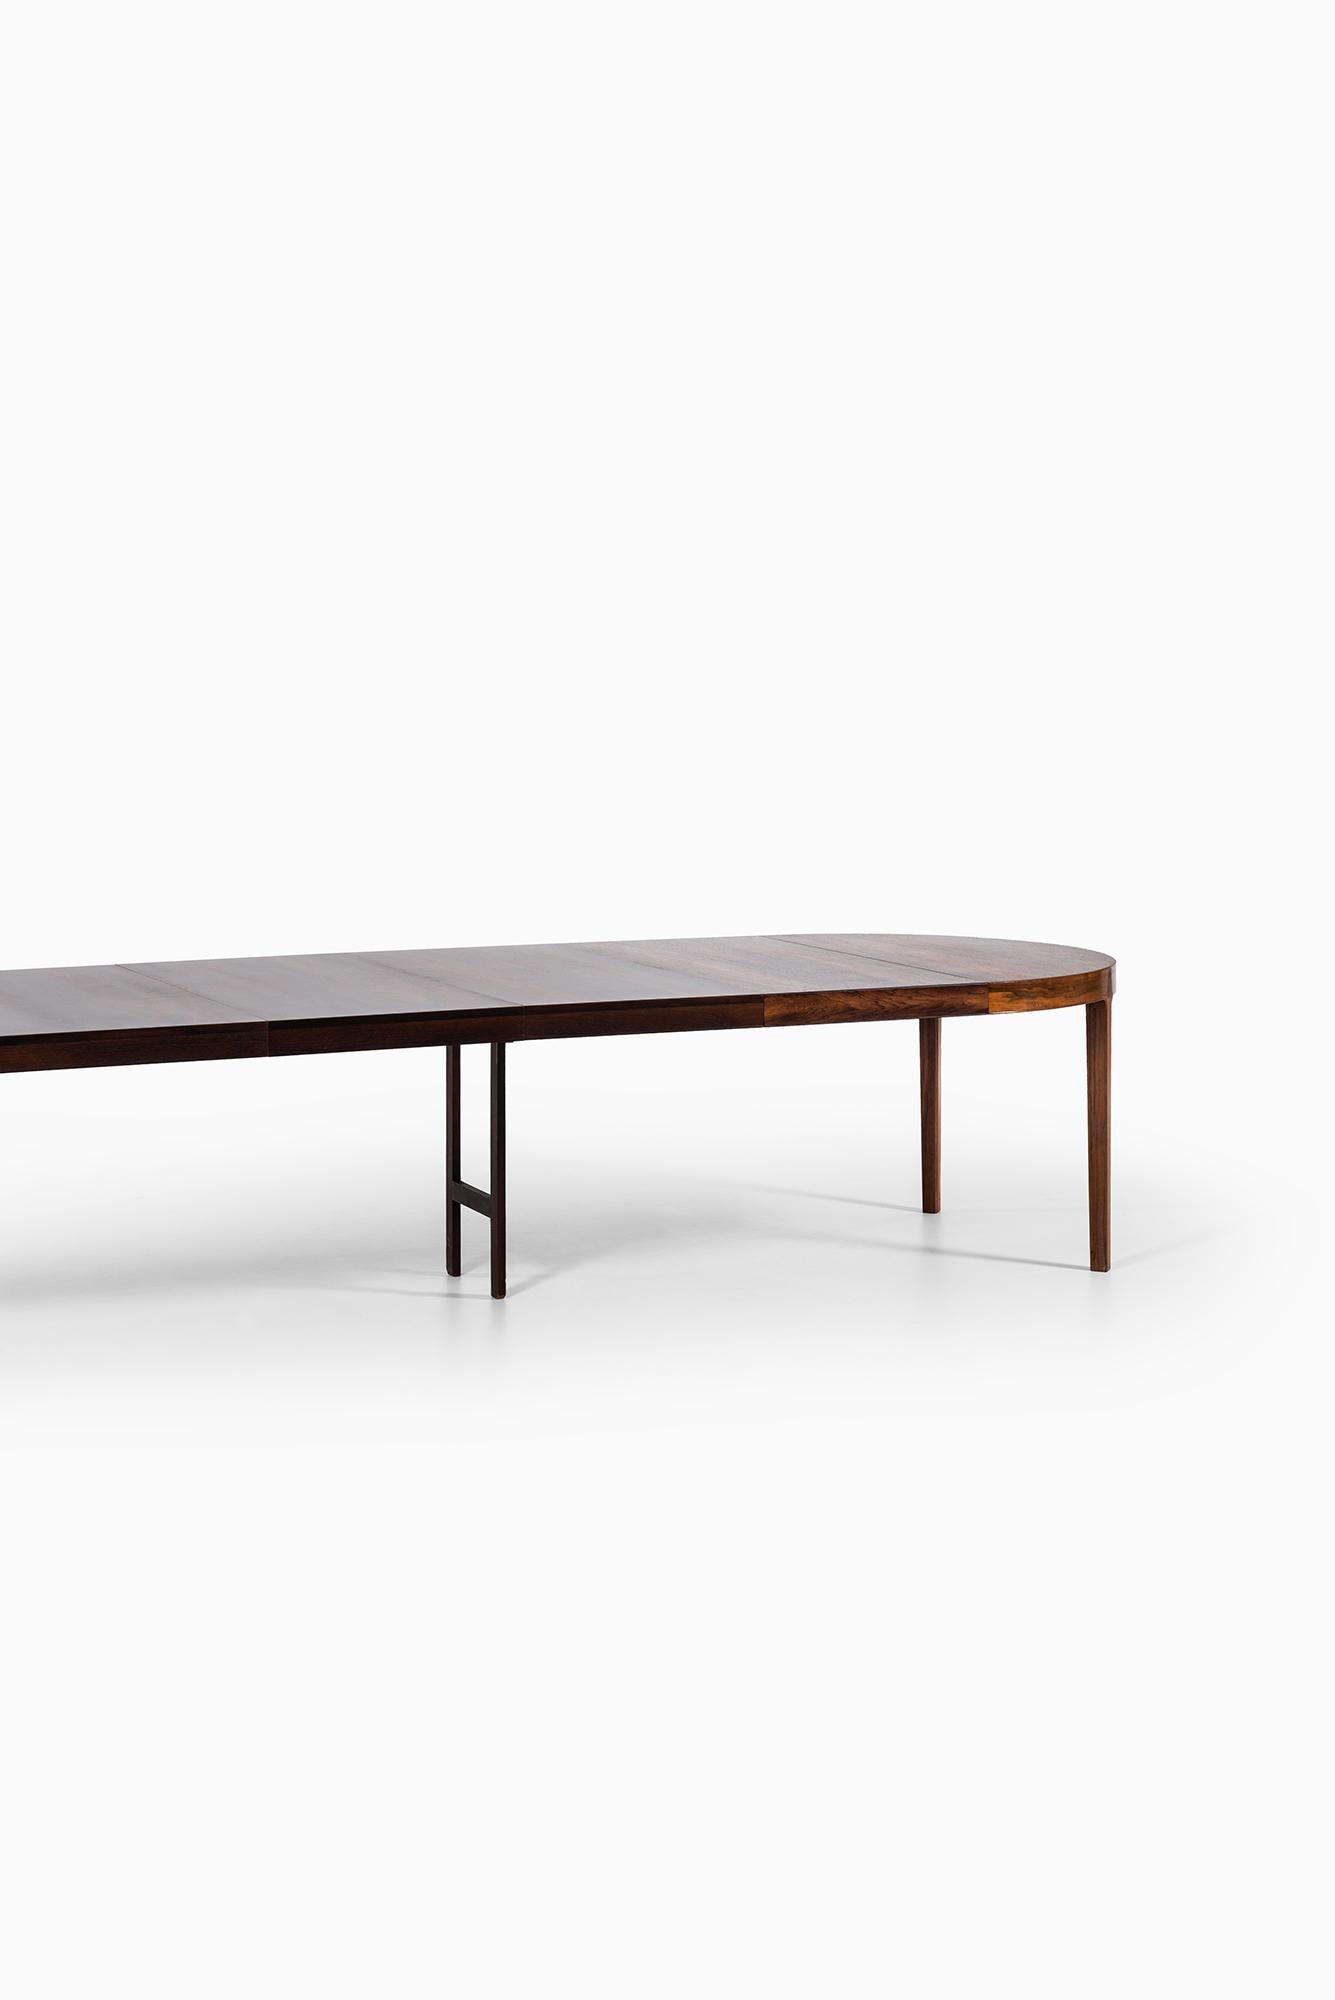 Very rare and large dining table designed by Ole Wanscher. Produced by cabinetmaker A.J. Iversen in Denmark.